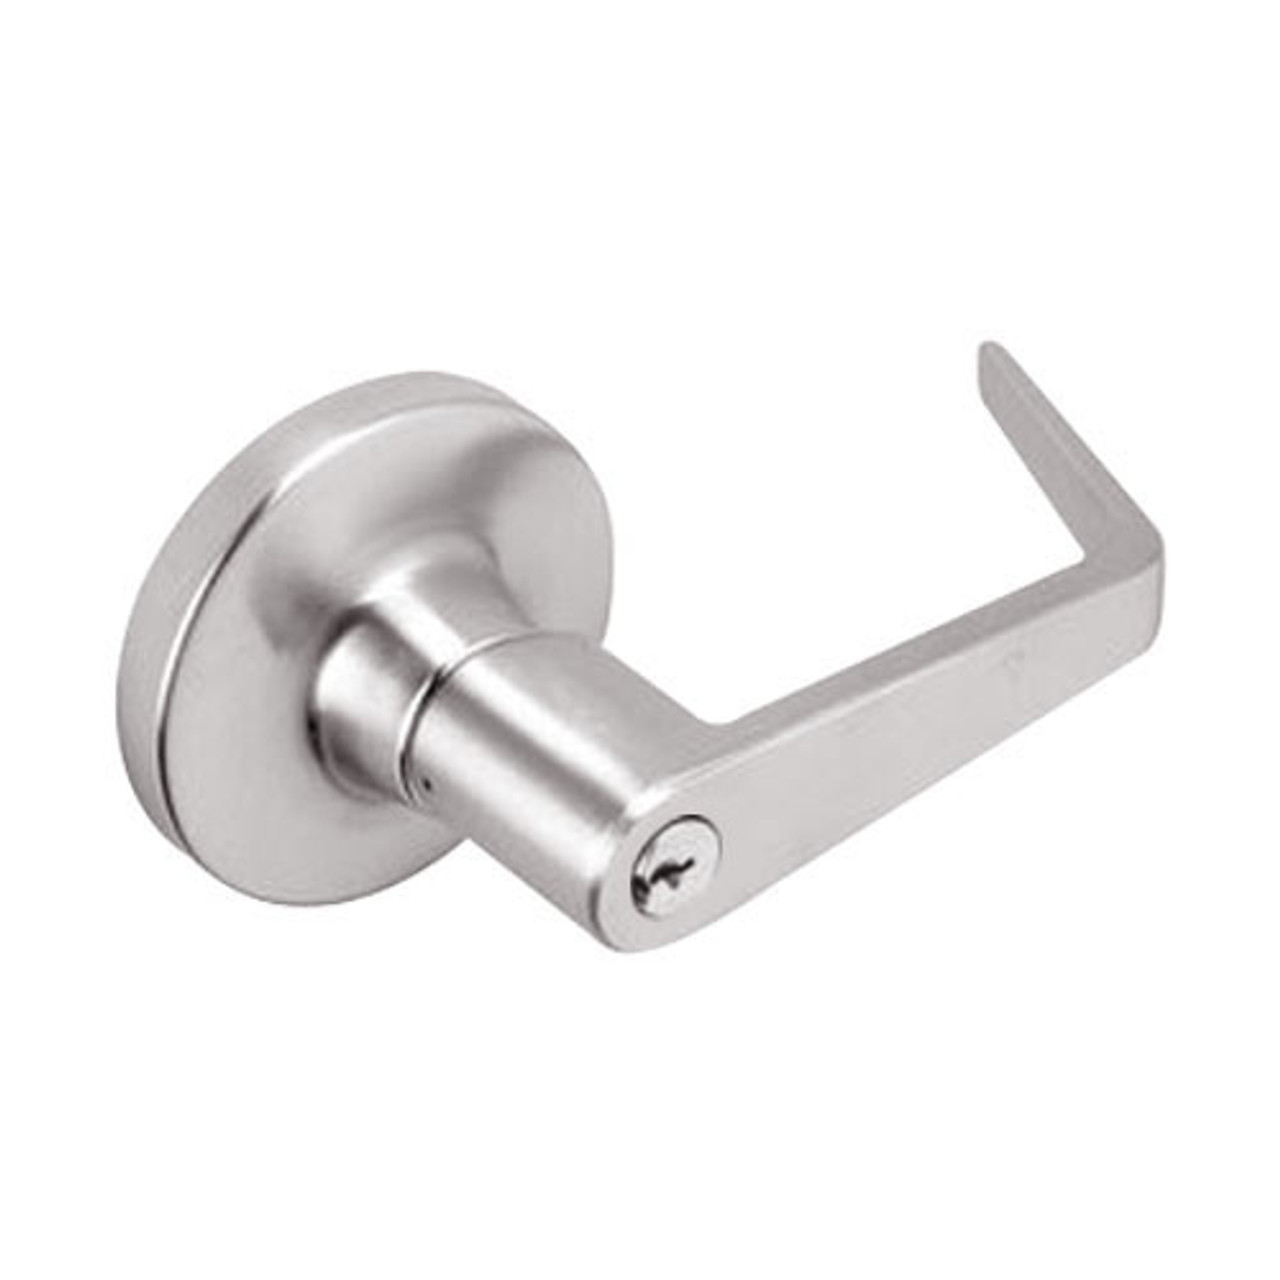 MA411P-DG-630 Falcon Mortise Locks MA Series Asylum with DG Lever in Satin Stainless Finish